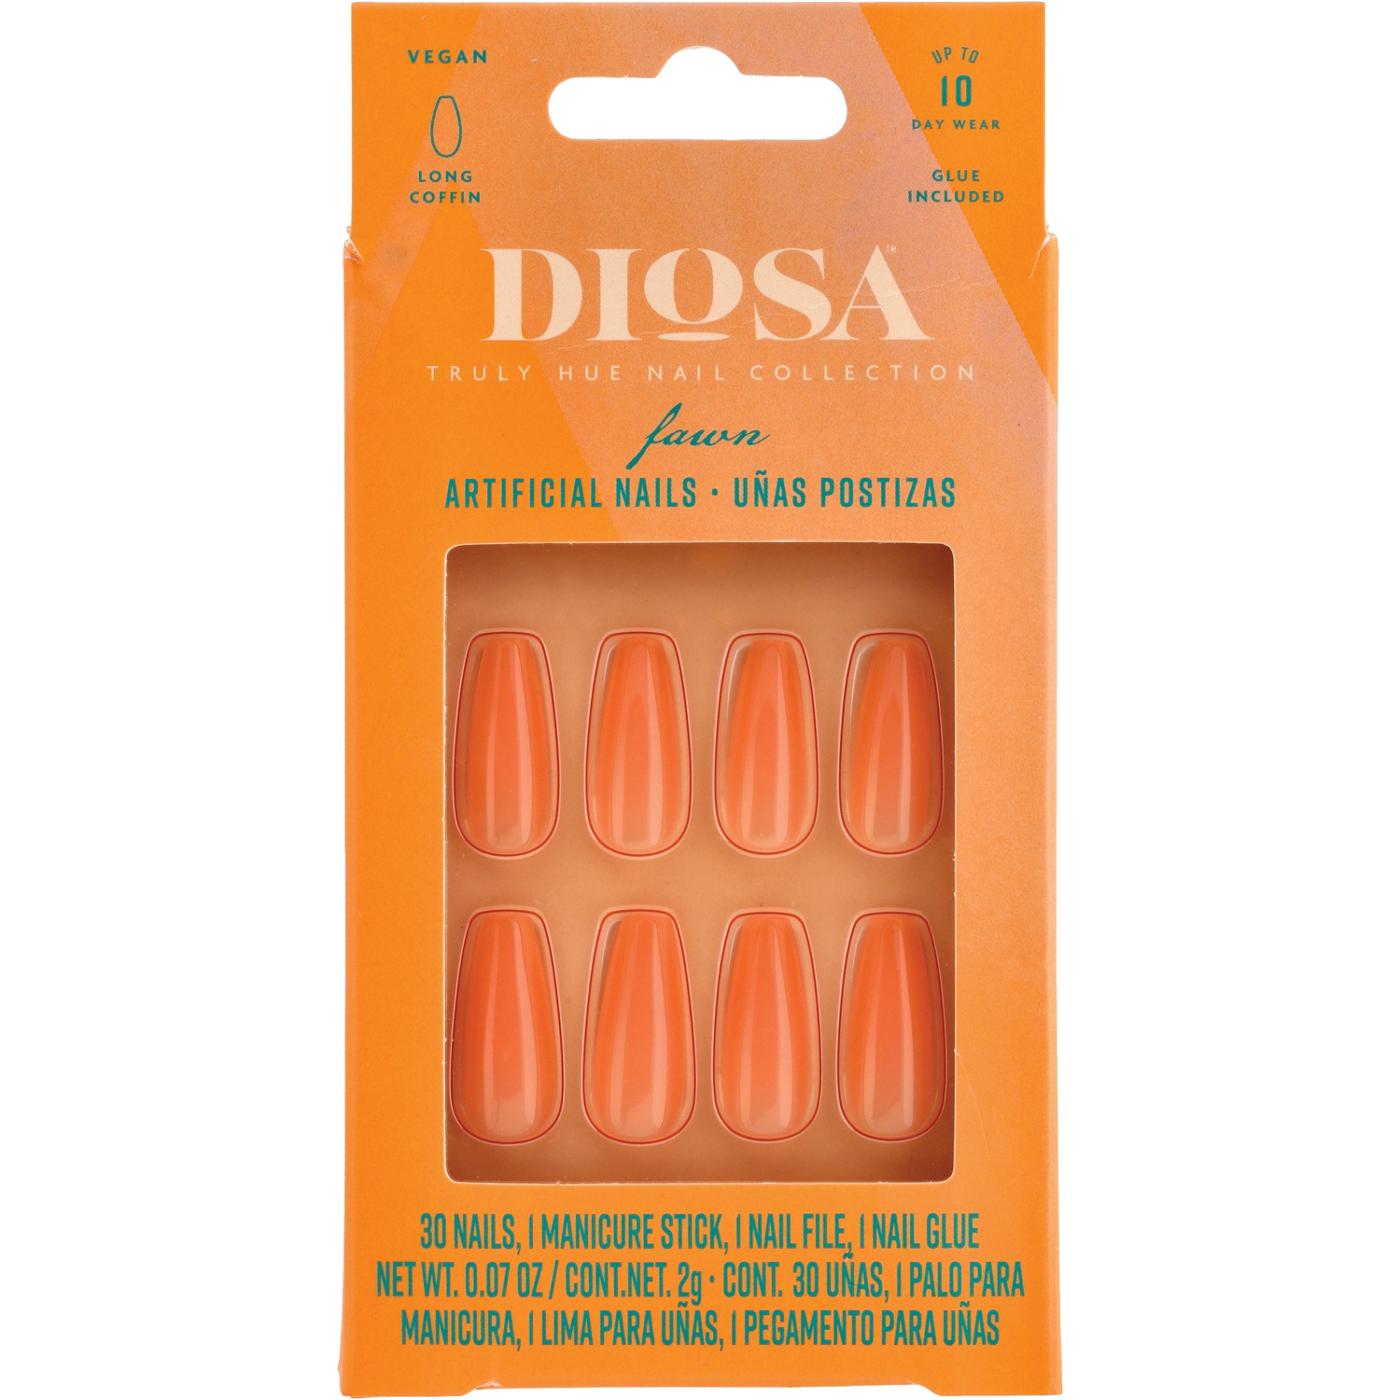 Diosa Long Coffin Artificial Nails – Truly Hue Fawn; image 1 of 7